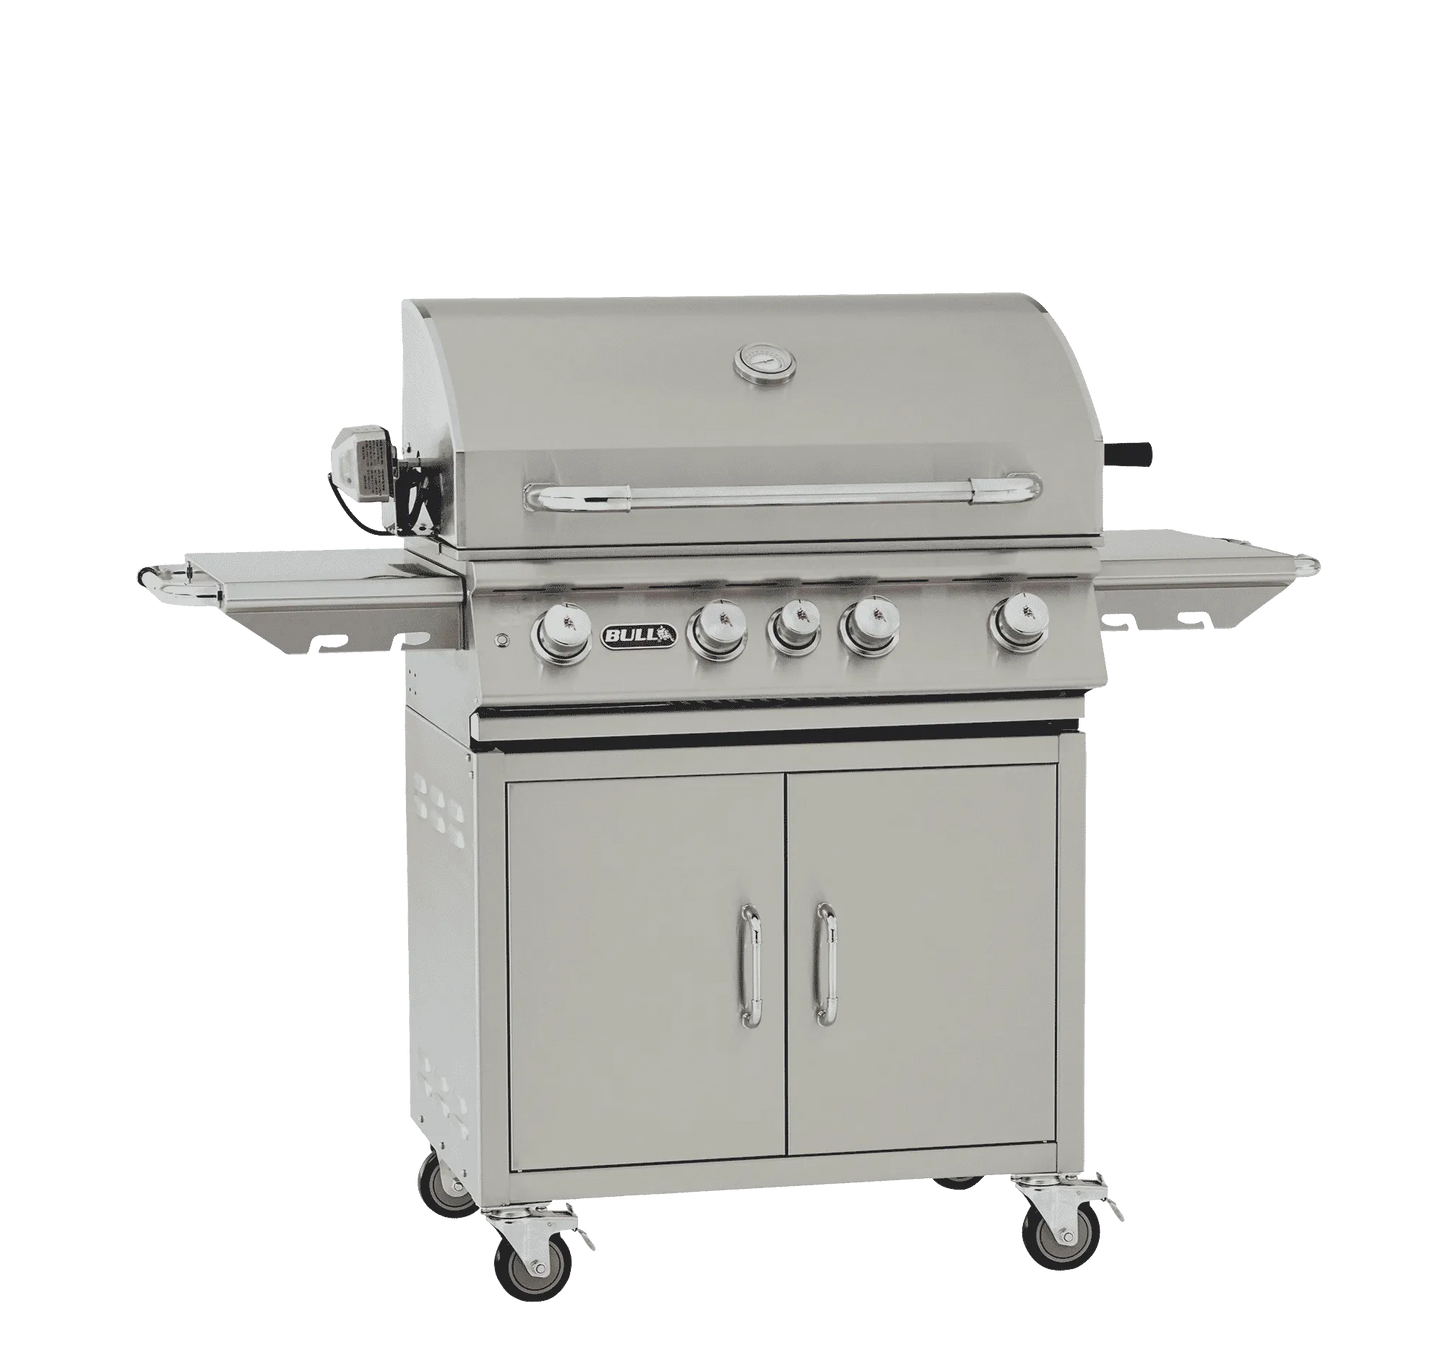 Bull BBQ Angus 30-Inch 4-Burner Freestanding Propane Gas Grill with Rear Infrared Burner